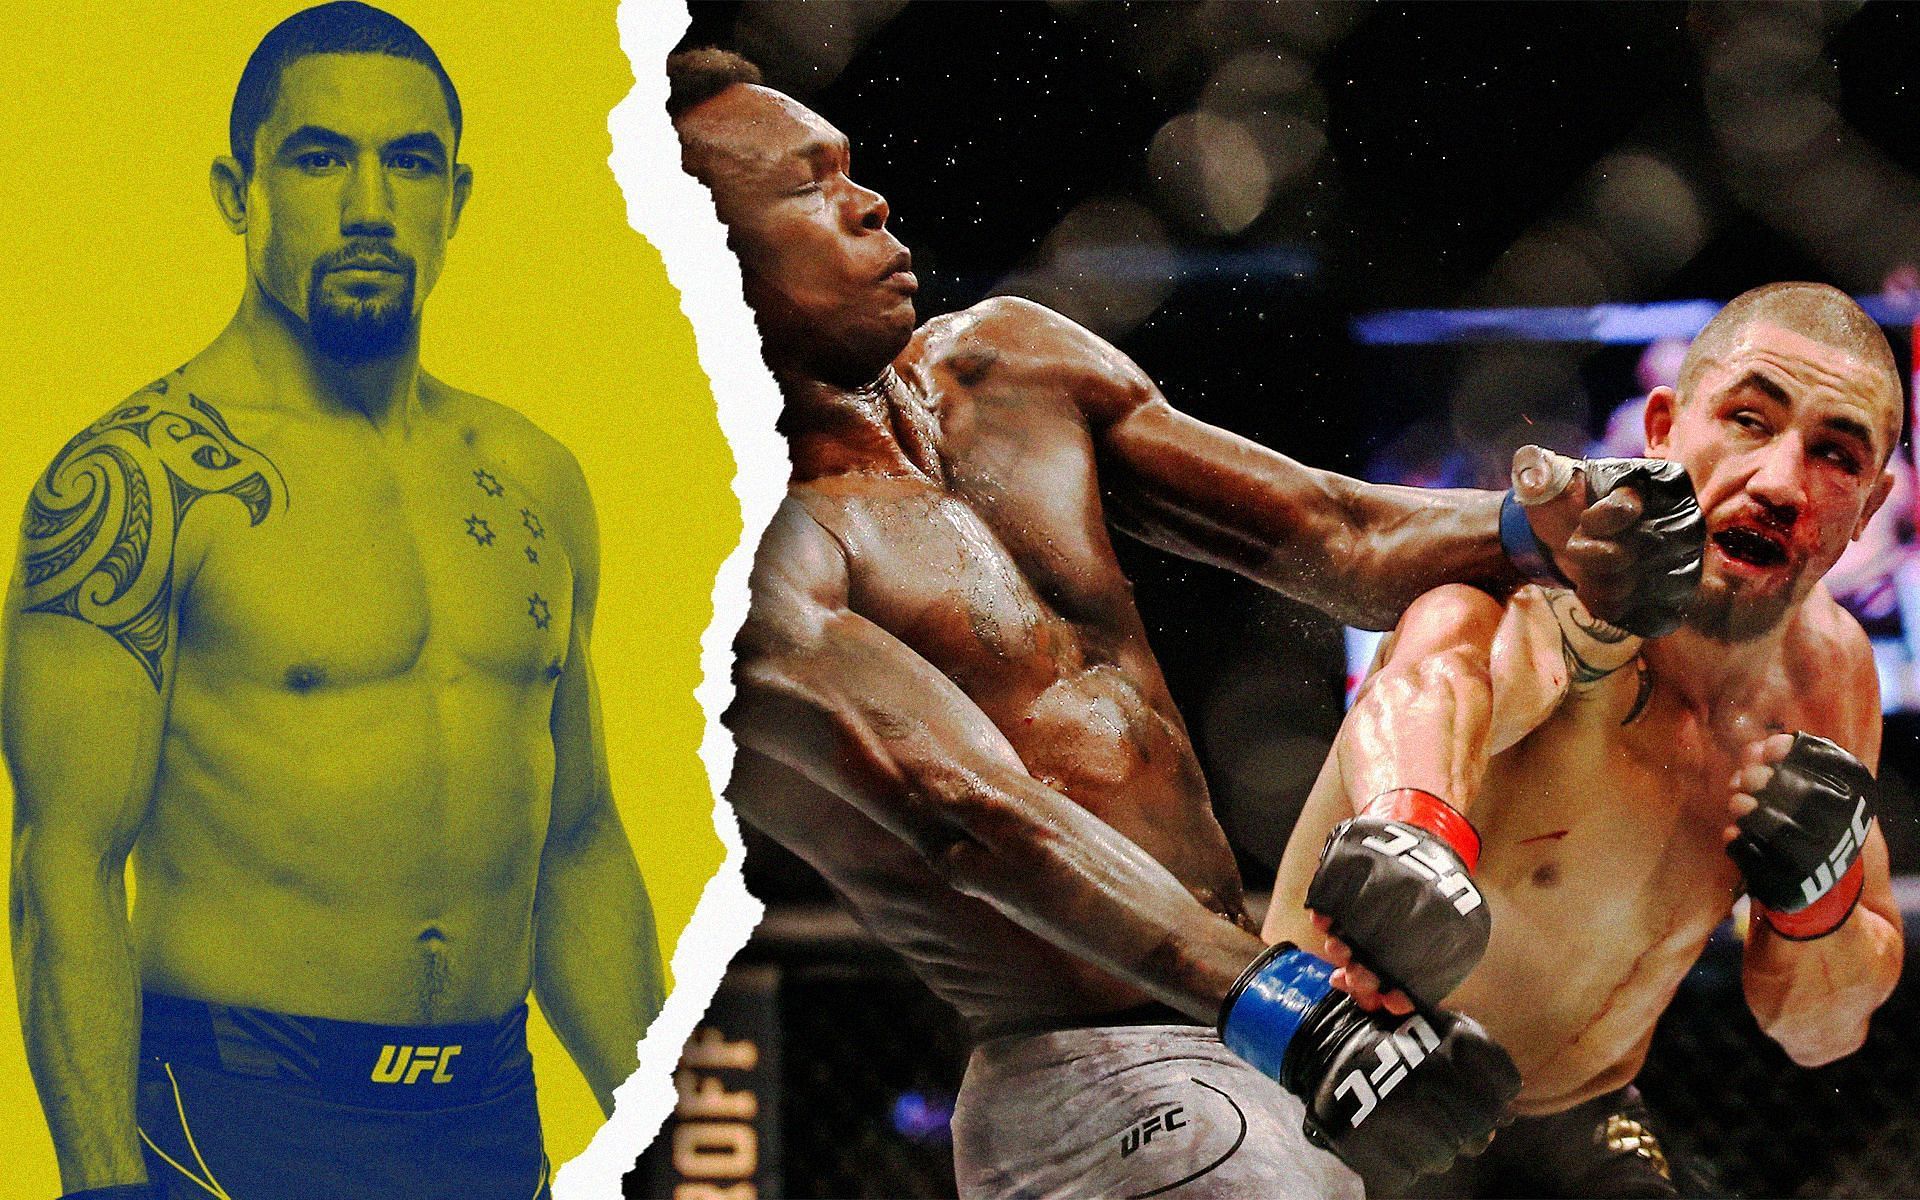 Robert Whittaker will face Israel Adesanya at UFC 271 [Image credits: Robert Whittaker - UFC.com (left) | Fight pic - Getty (right)]